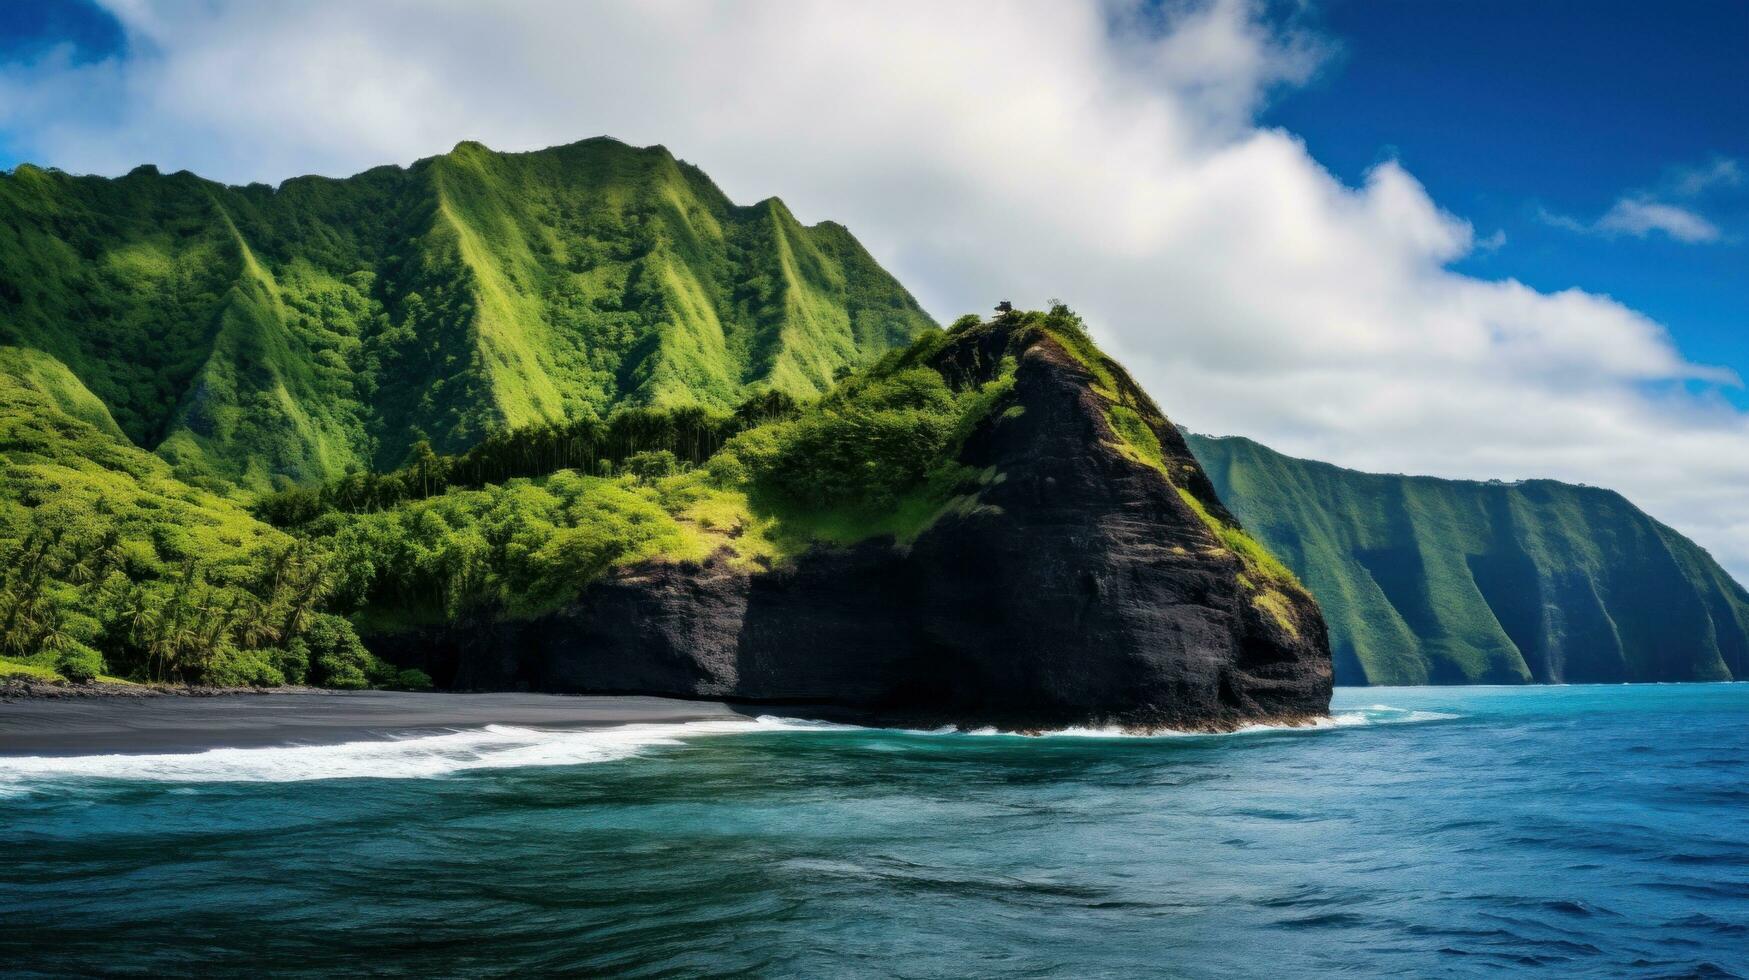 AI generated showcases the unique beauty of a volcanic island, with its lush greenery, black sand beaches photo